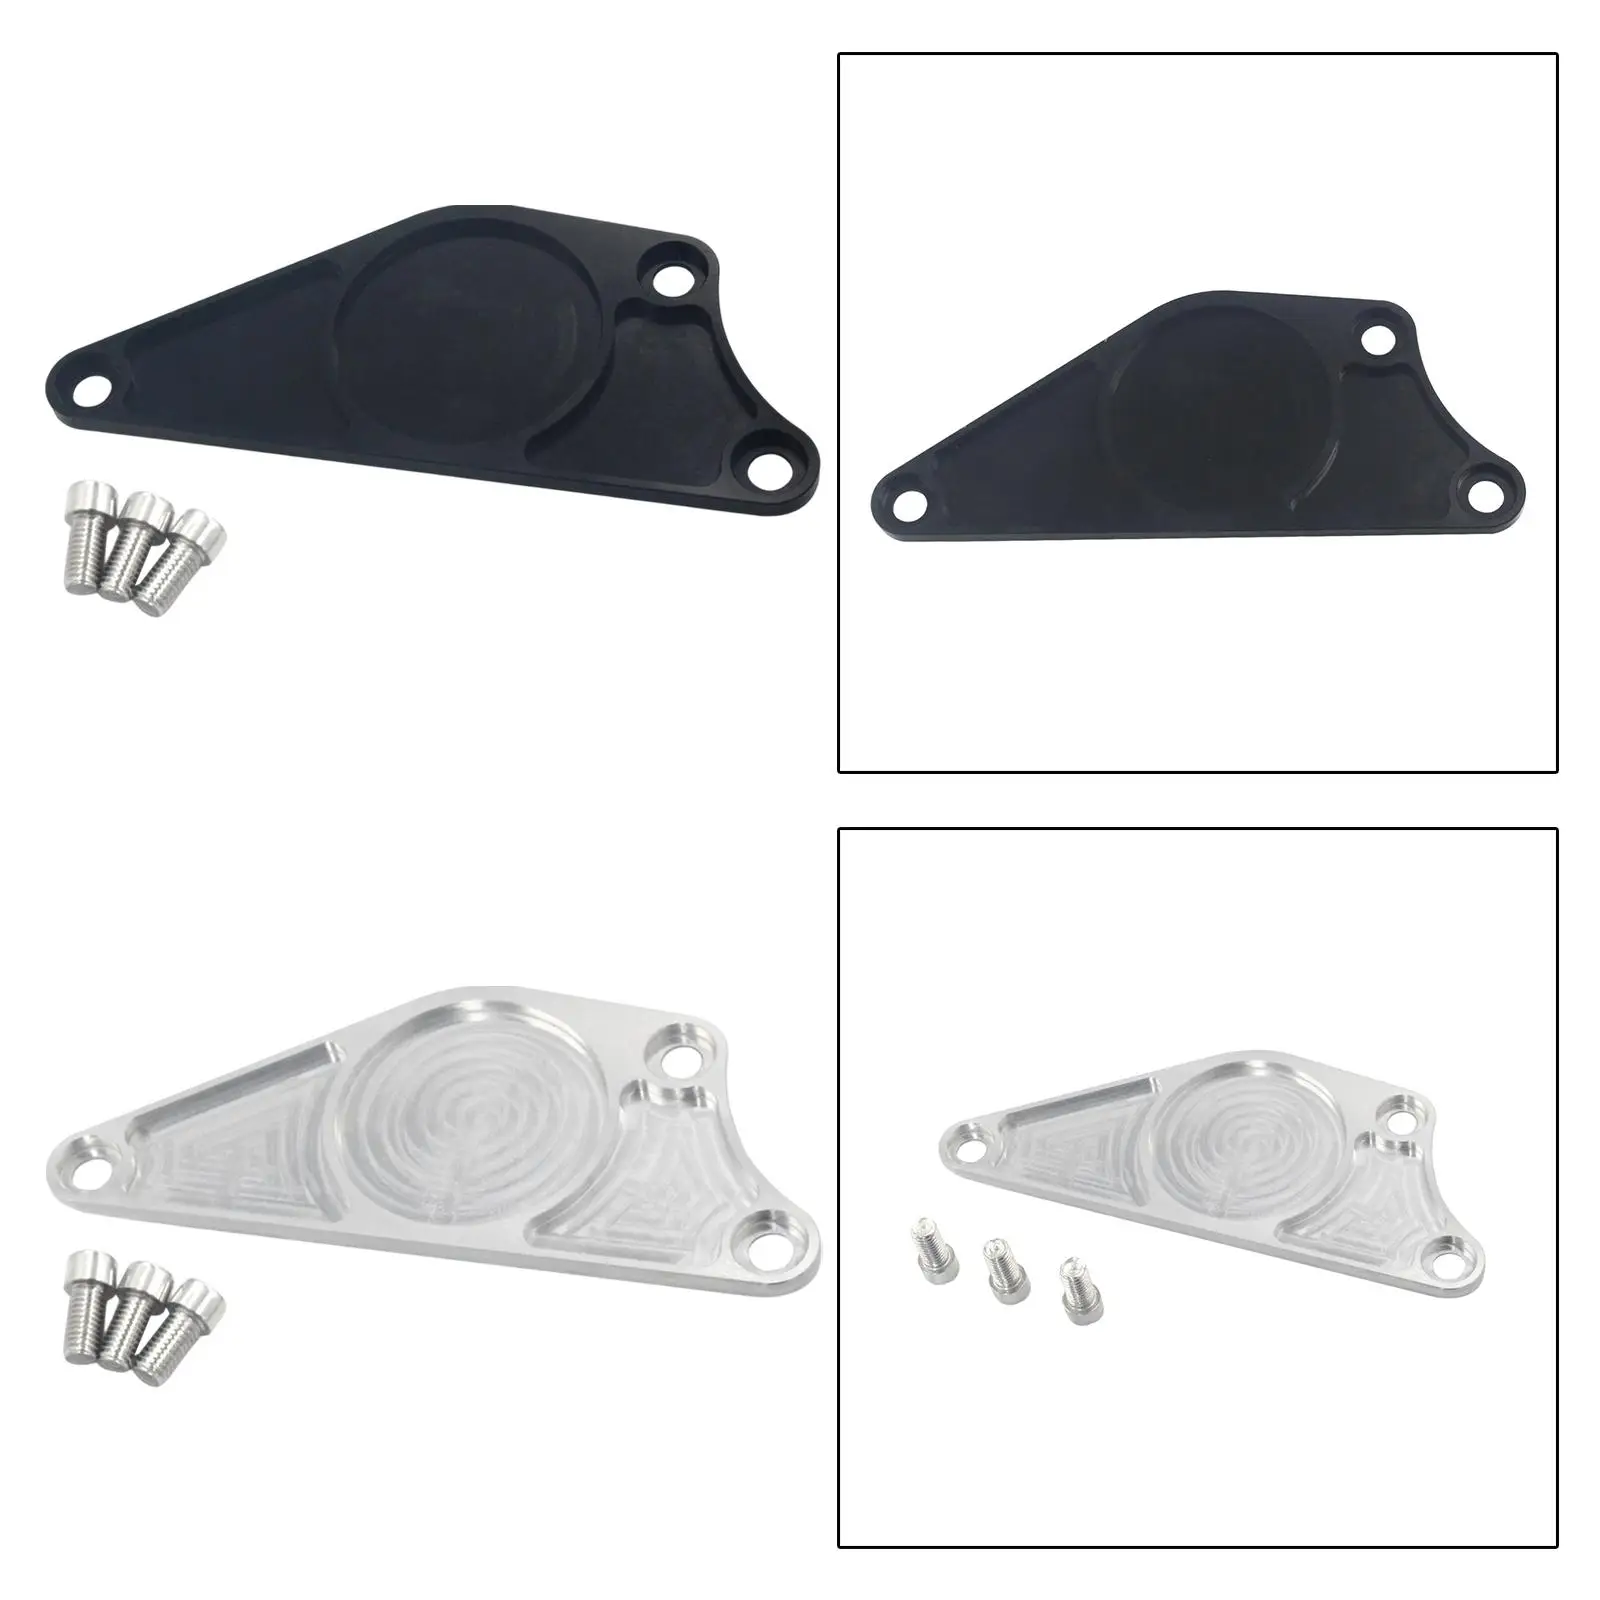 Billet cam Plate Fits Adapter Replacement High Performance Access for Scion FRS 2013+ Easy to Install Camshaft Plate